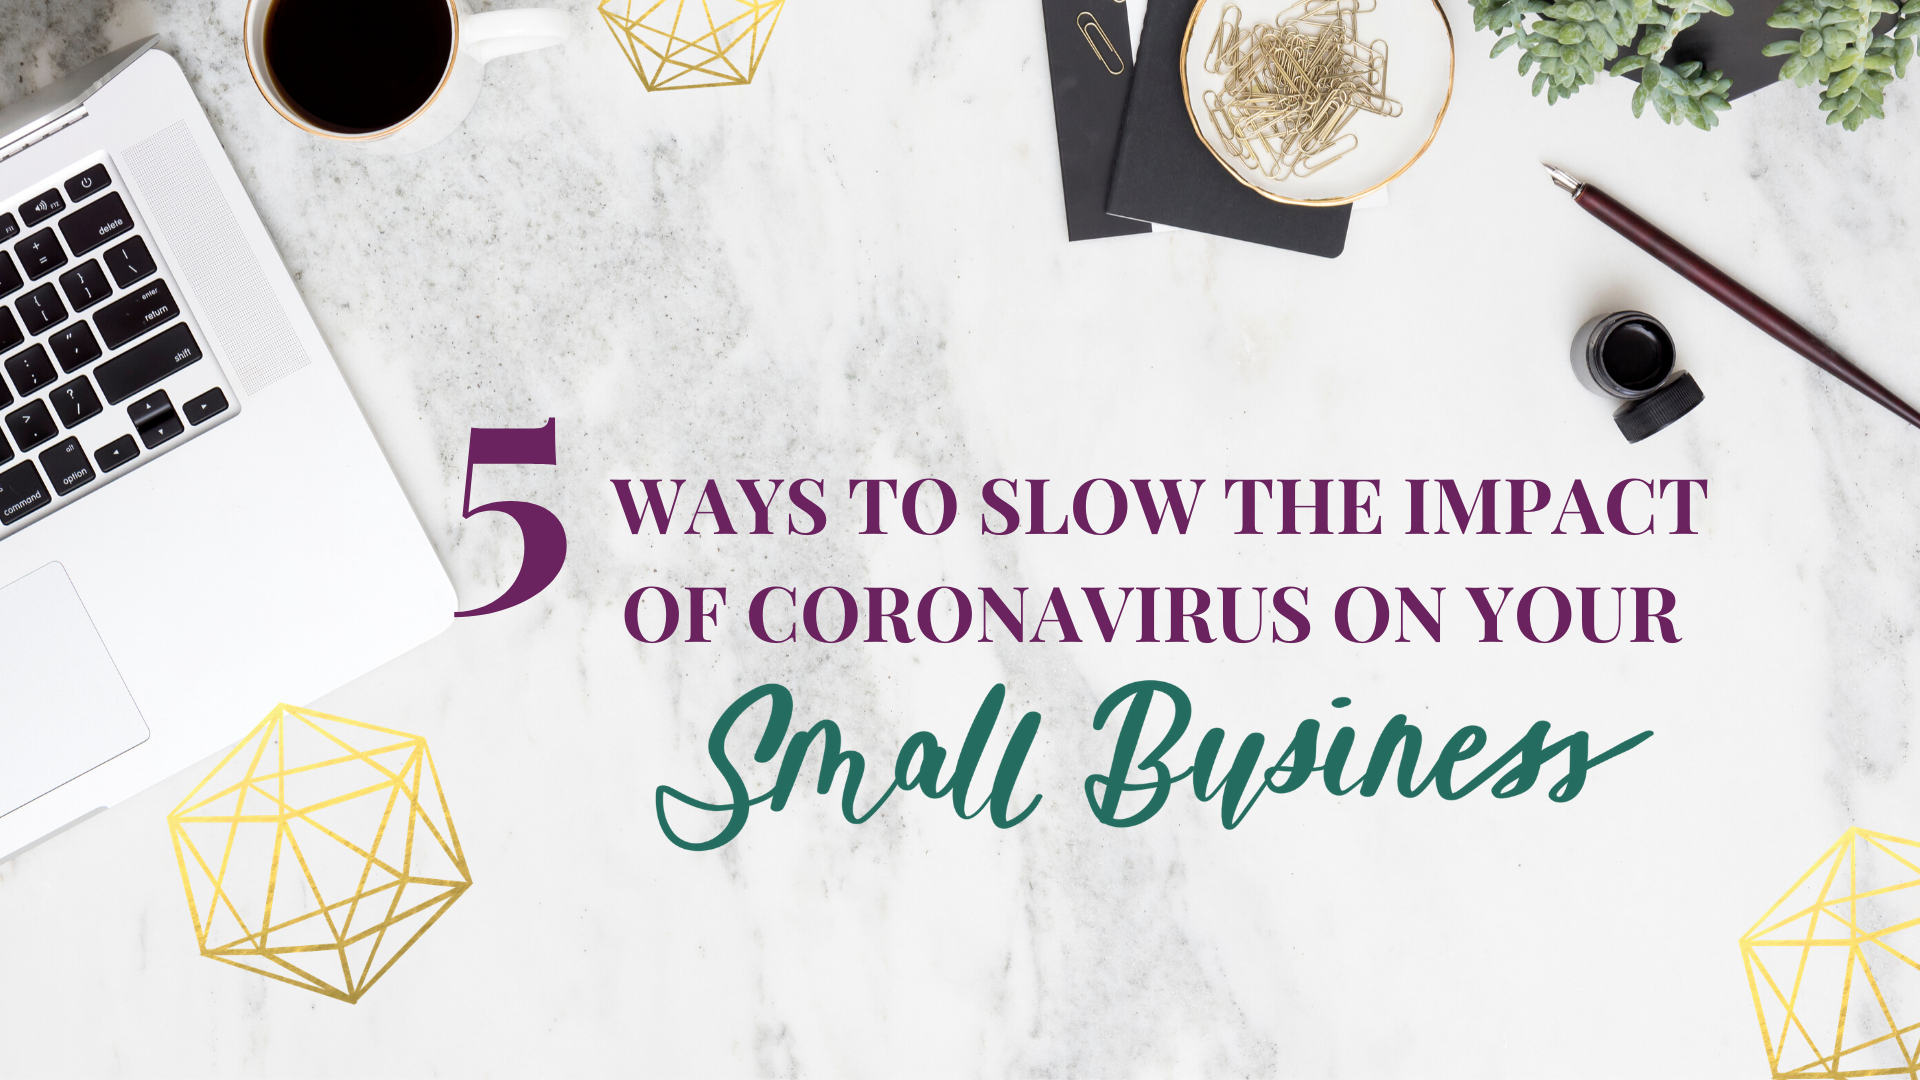 5 ways to slow the impact of coronavirus on your small business